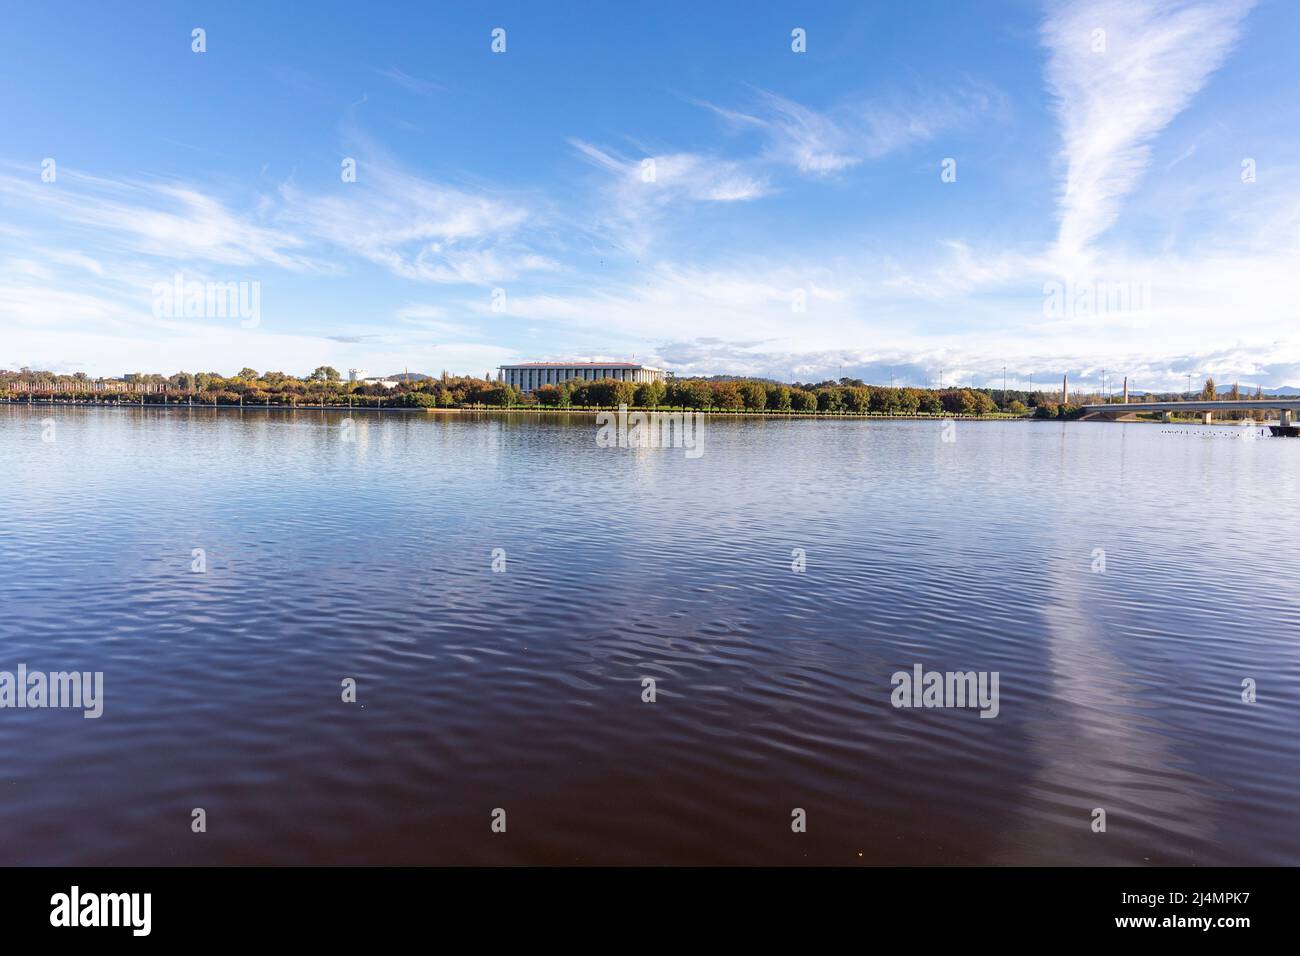 Canberra, National Library on the shores of Lake Burley Griffin in Canberra city centre,ACT,Australia Stock Photo